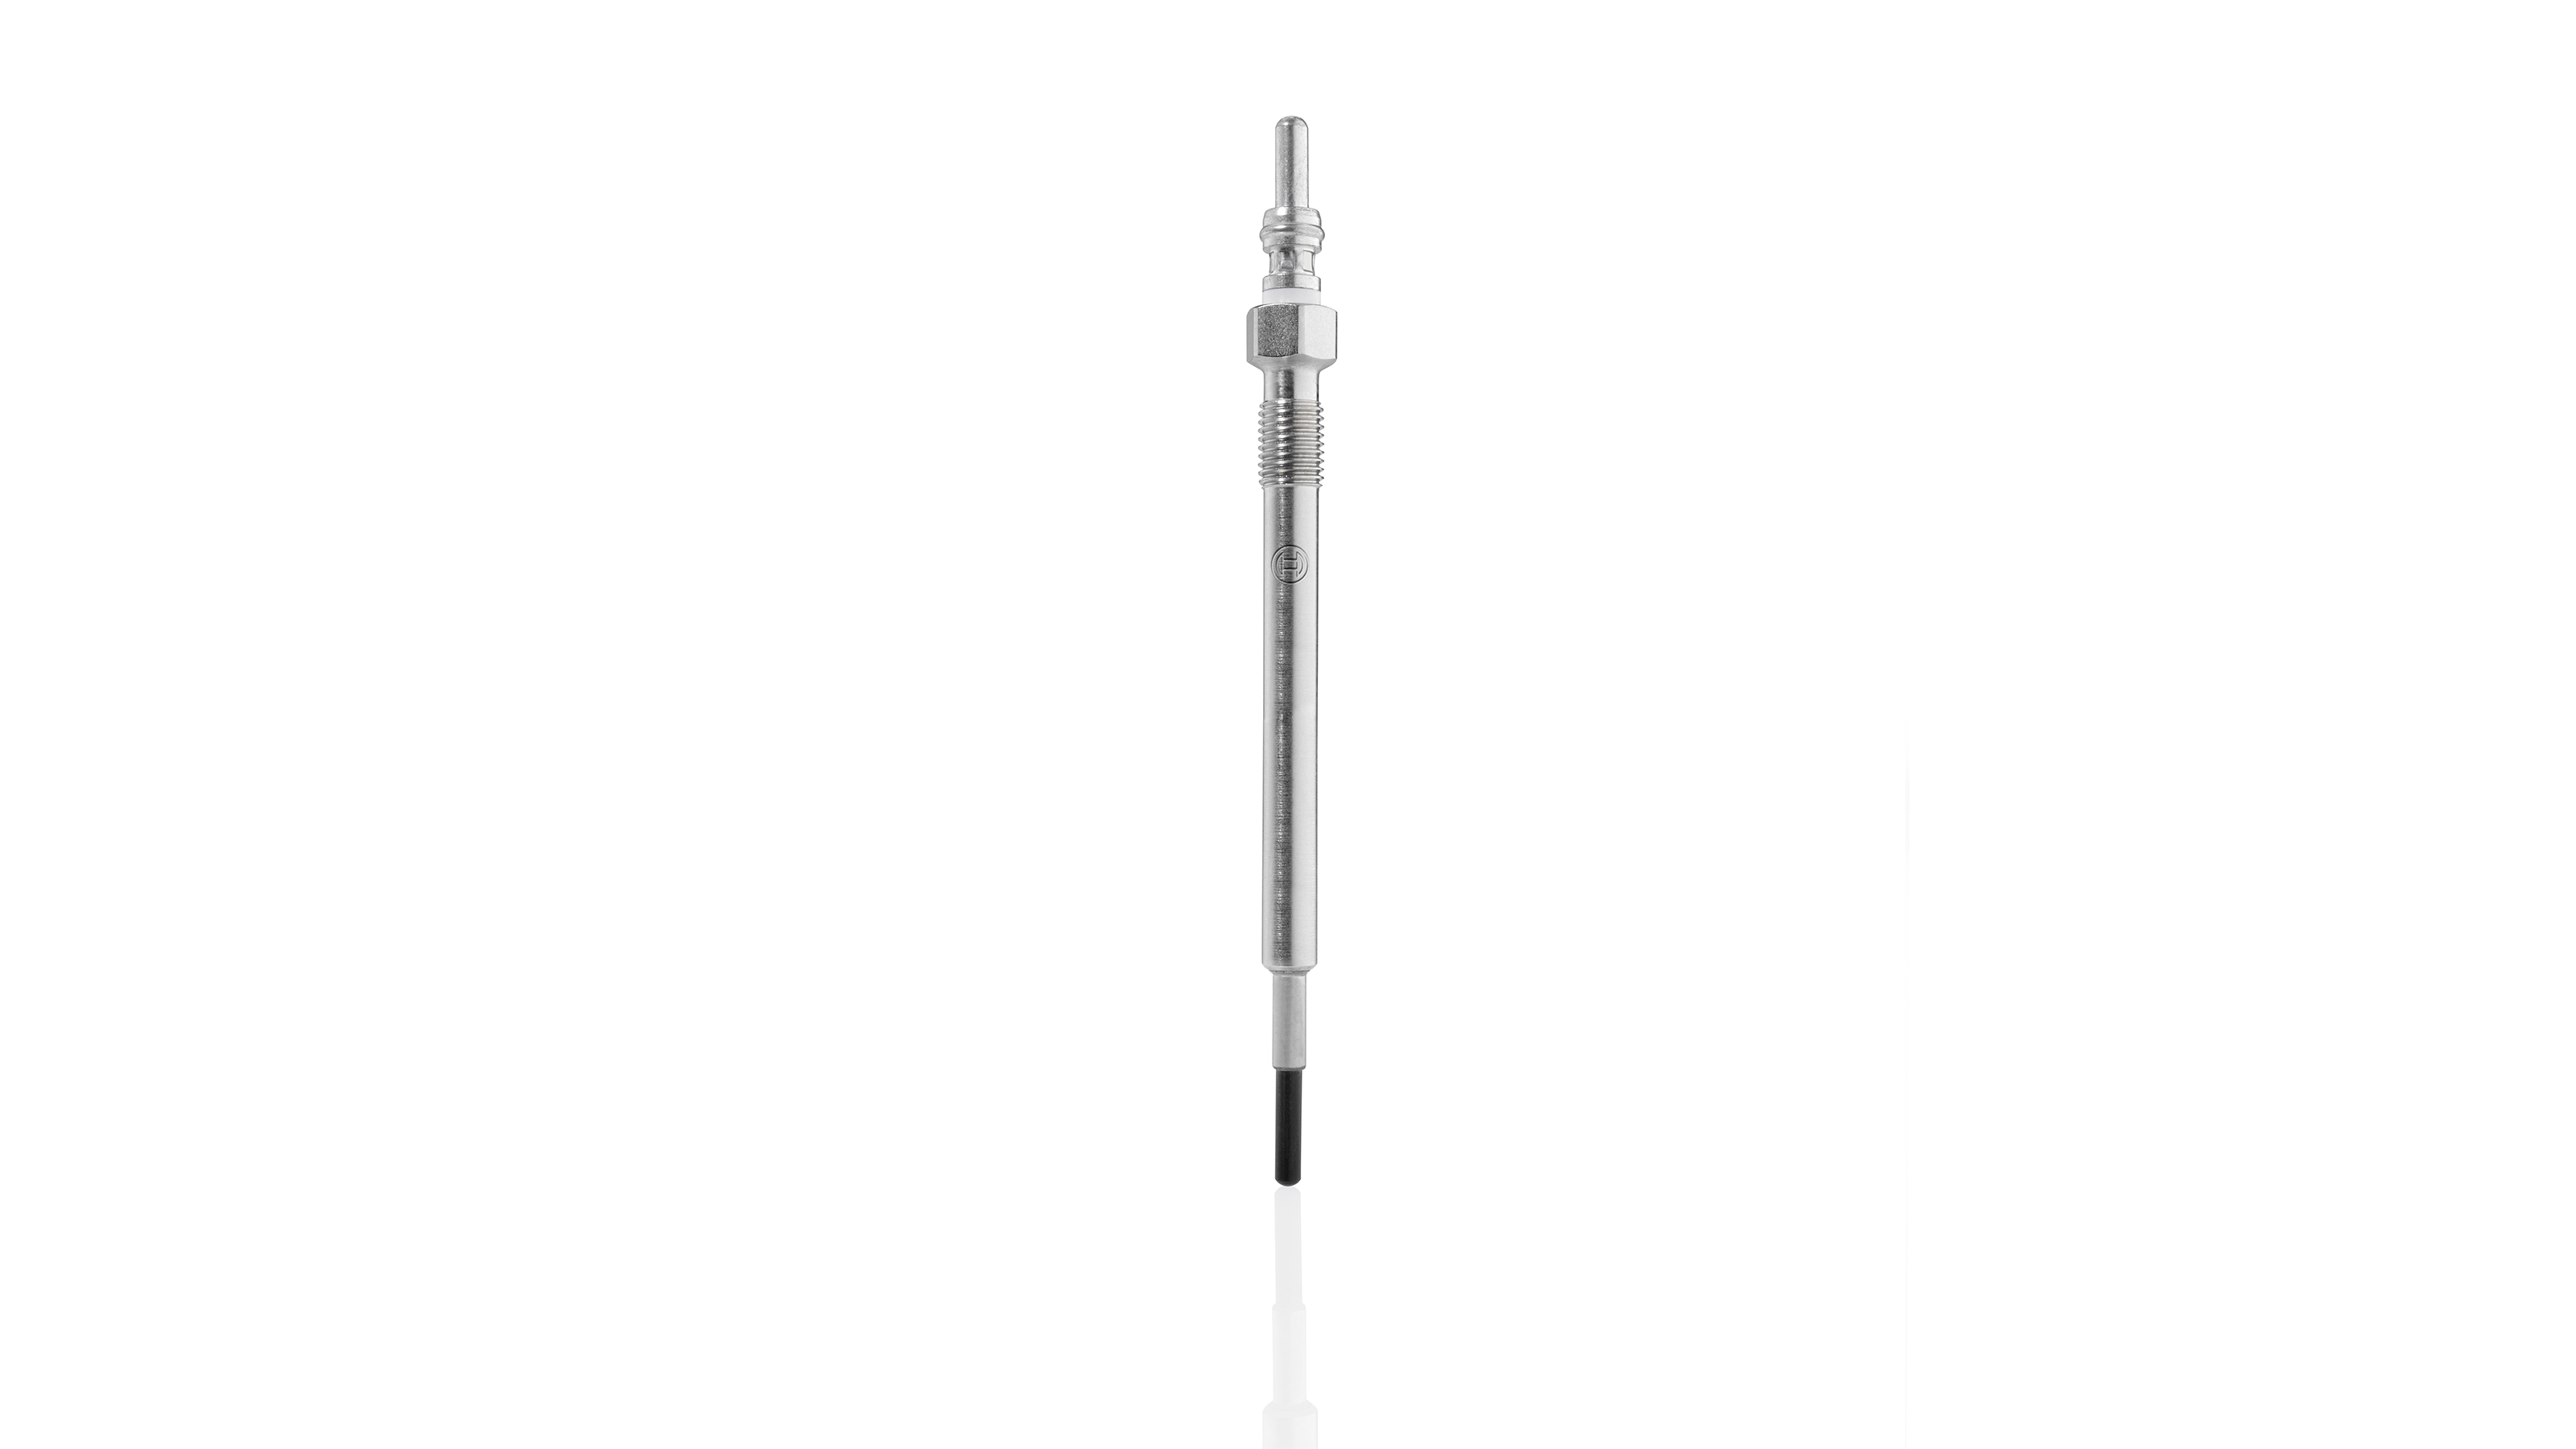 Bosch 0 250 201 047 Glow Plug “discontinued by manufacturer” 